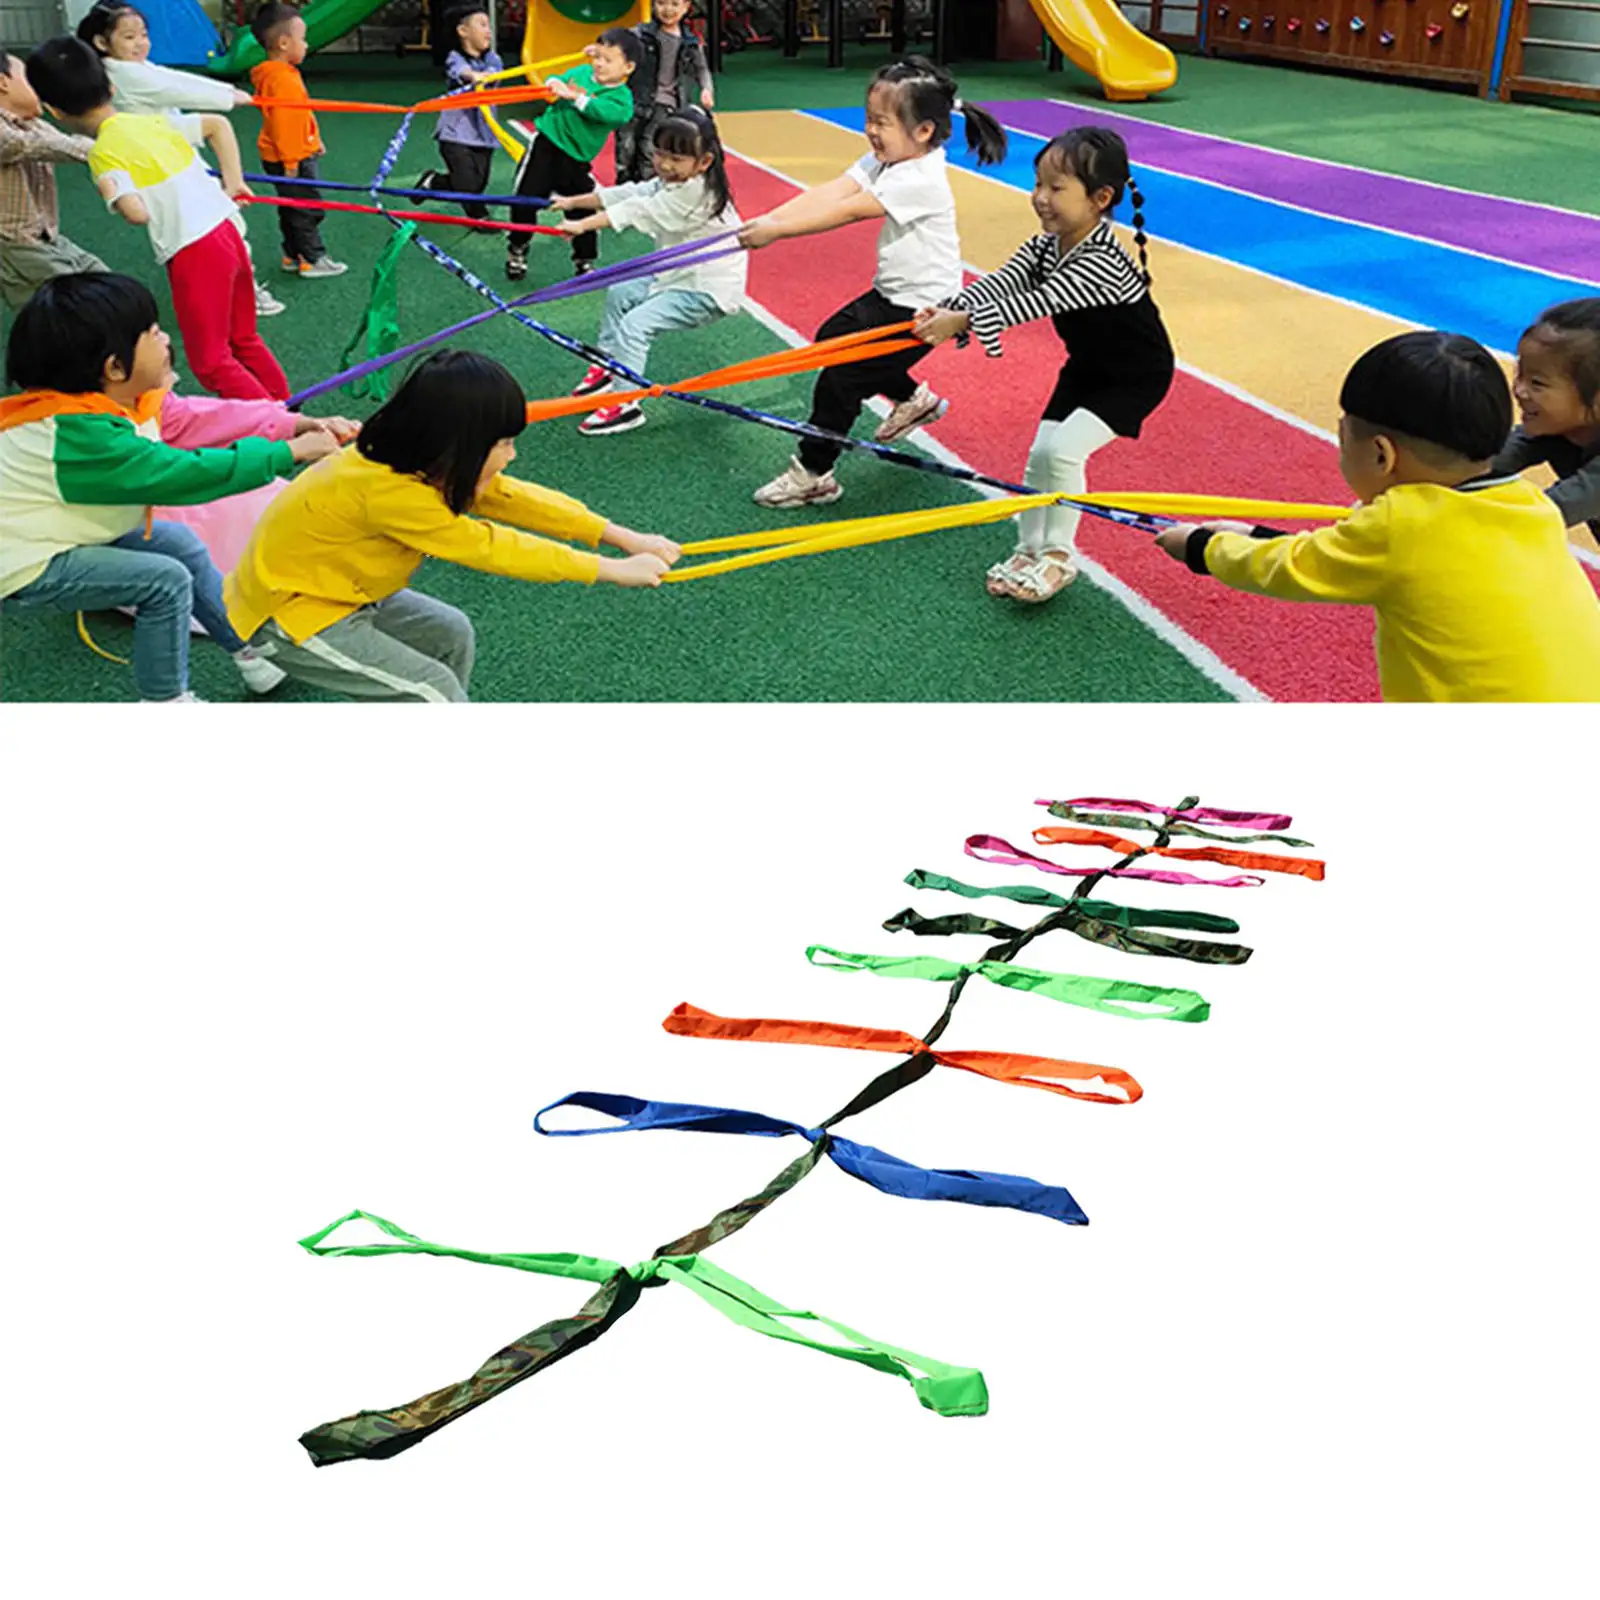 Tug of War Rope Team Building Group Play Yard Game for Teachers Kids Toddler